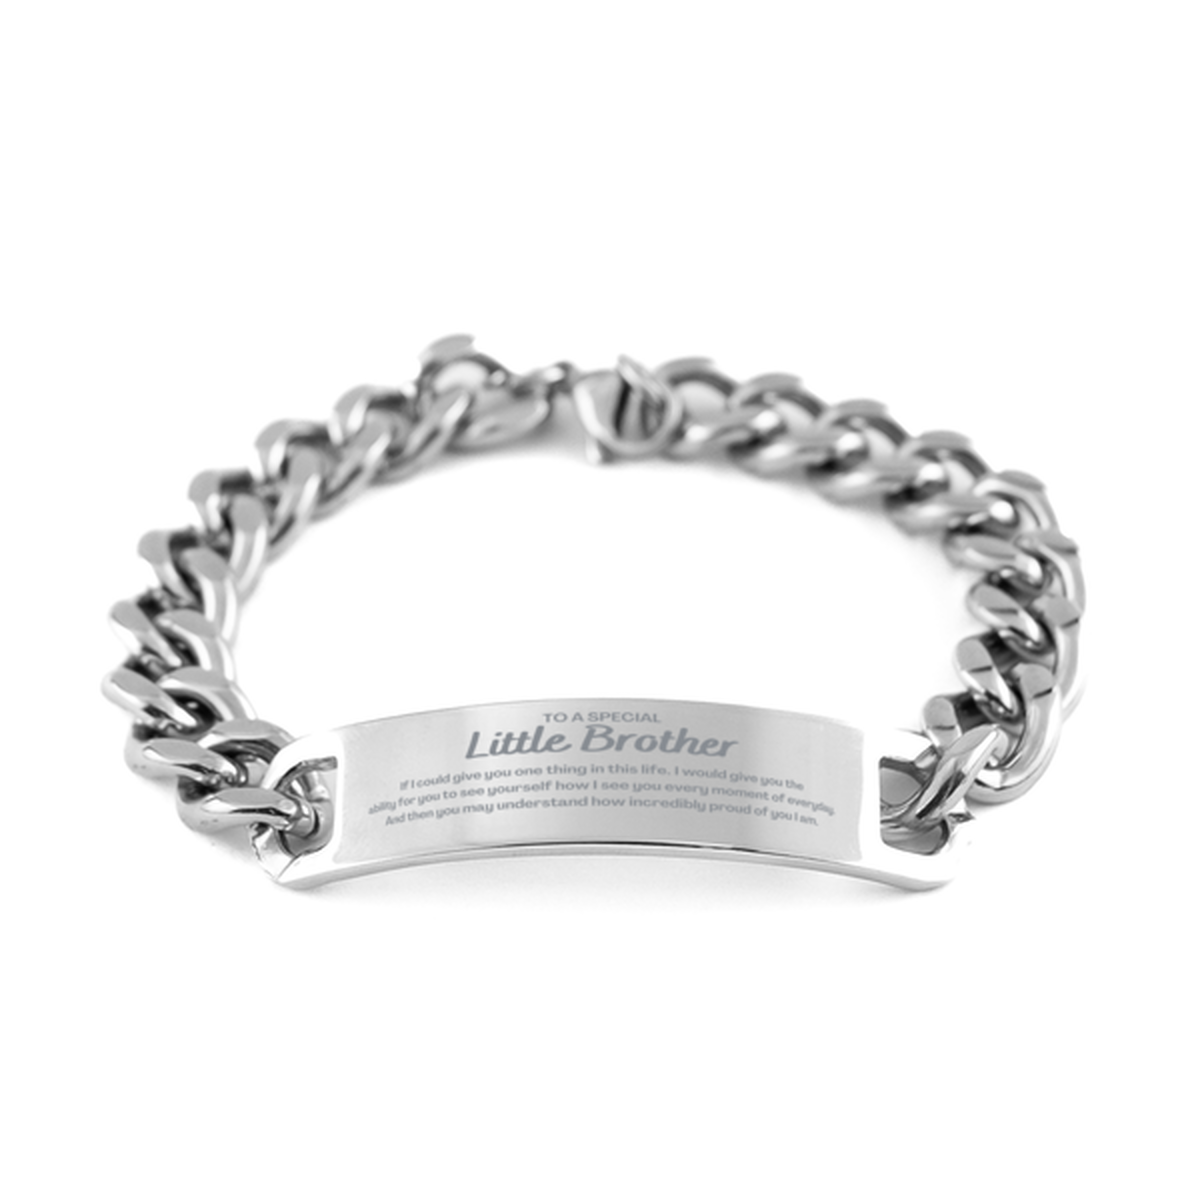 To My Little Brother Cuban Chain Stainless Steel Bracelet, Gifts For Little Brother Engraved, Inspirational Gifts for Christmas Birthday, Epic Gifts for Little Brother To A Special Little Brother how incredibly proud of you I am